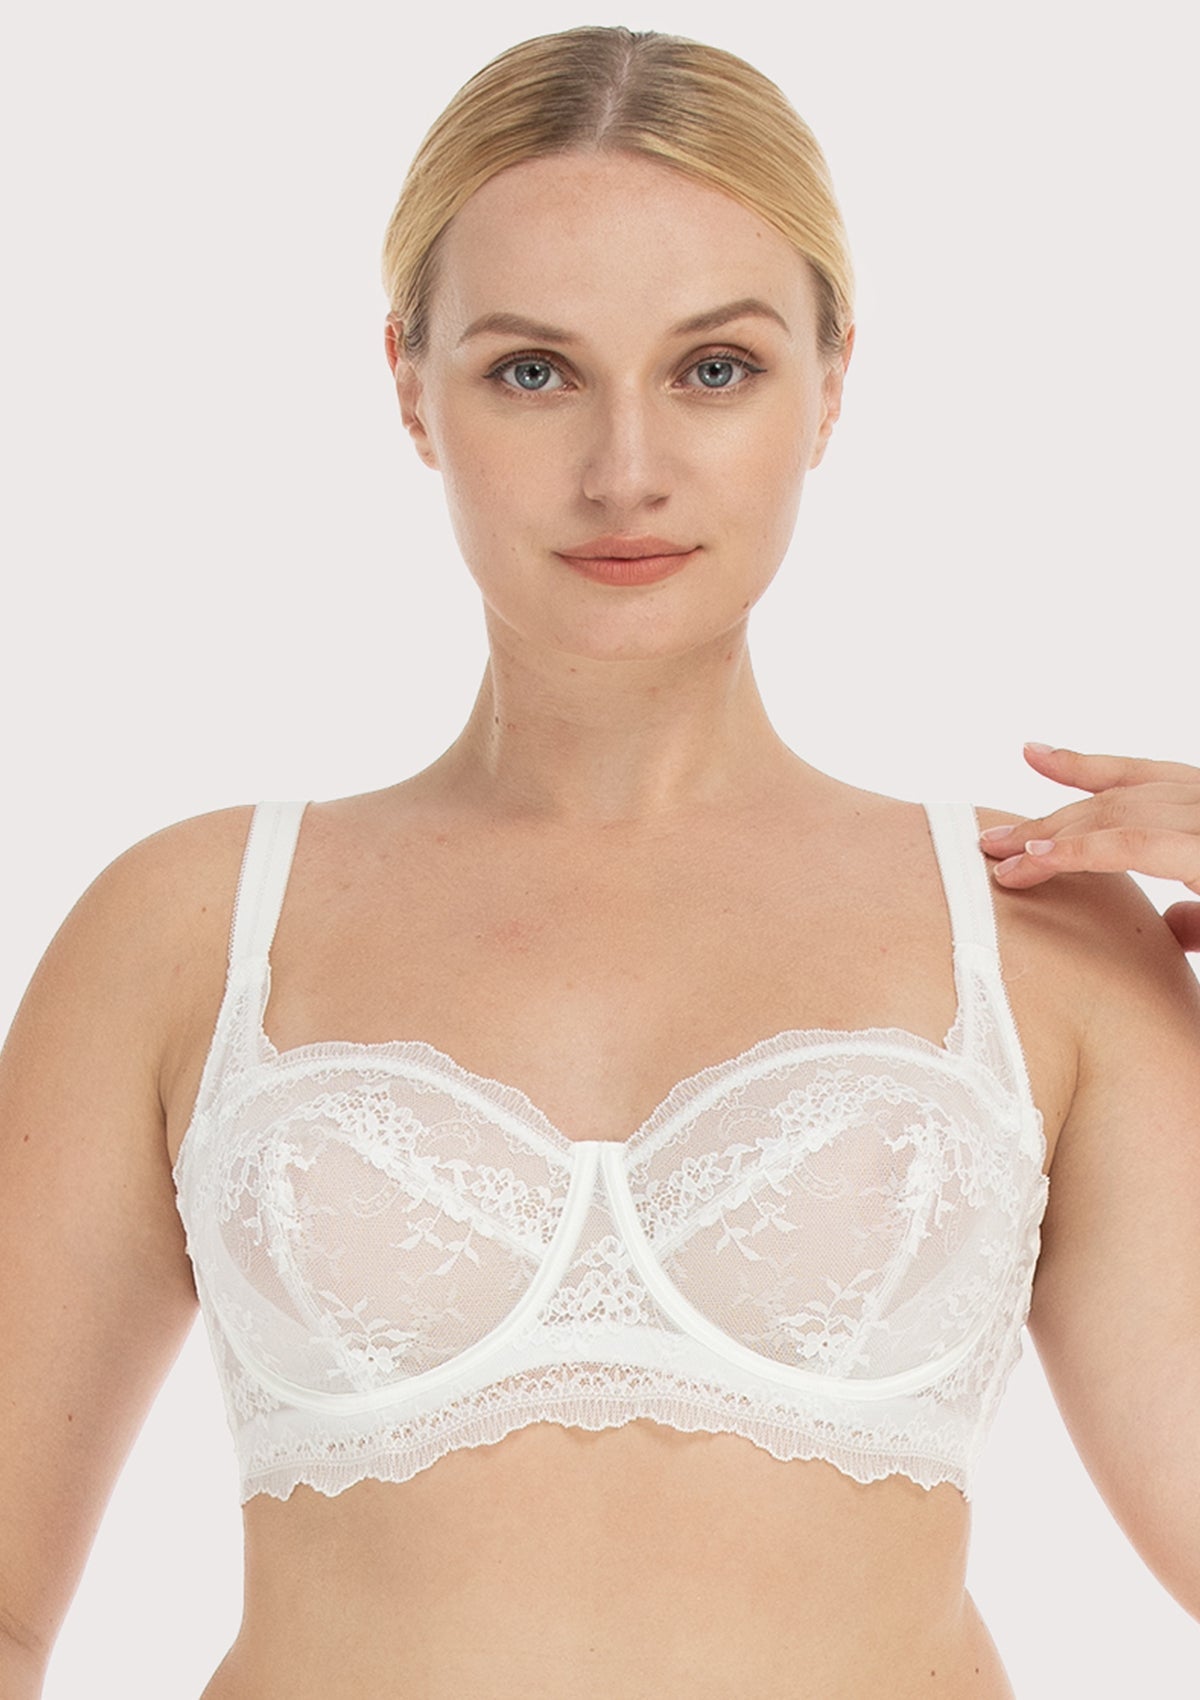 HSIA I Do Floral Lace Bridal Balconette Beautiful Bra For Special Day - Burgundy / 42 / DDD/F